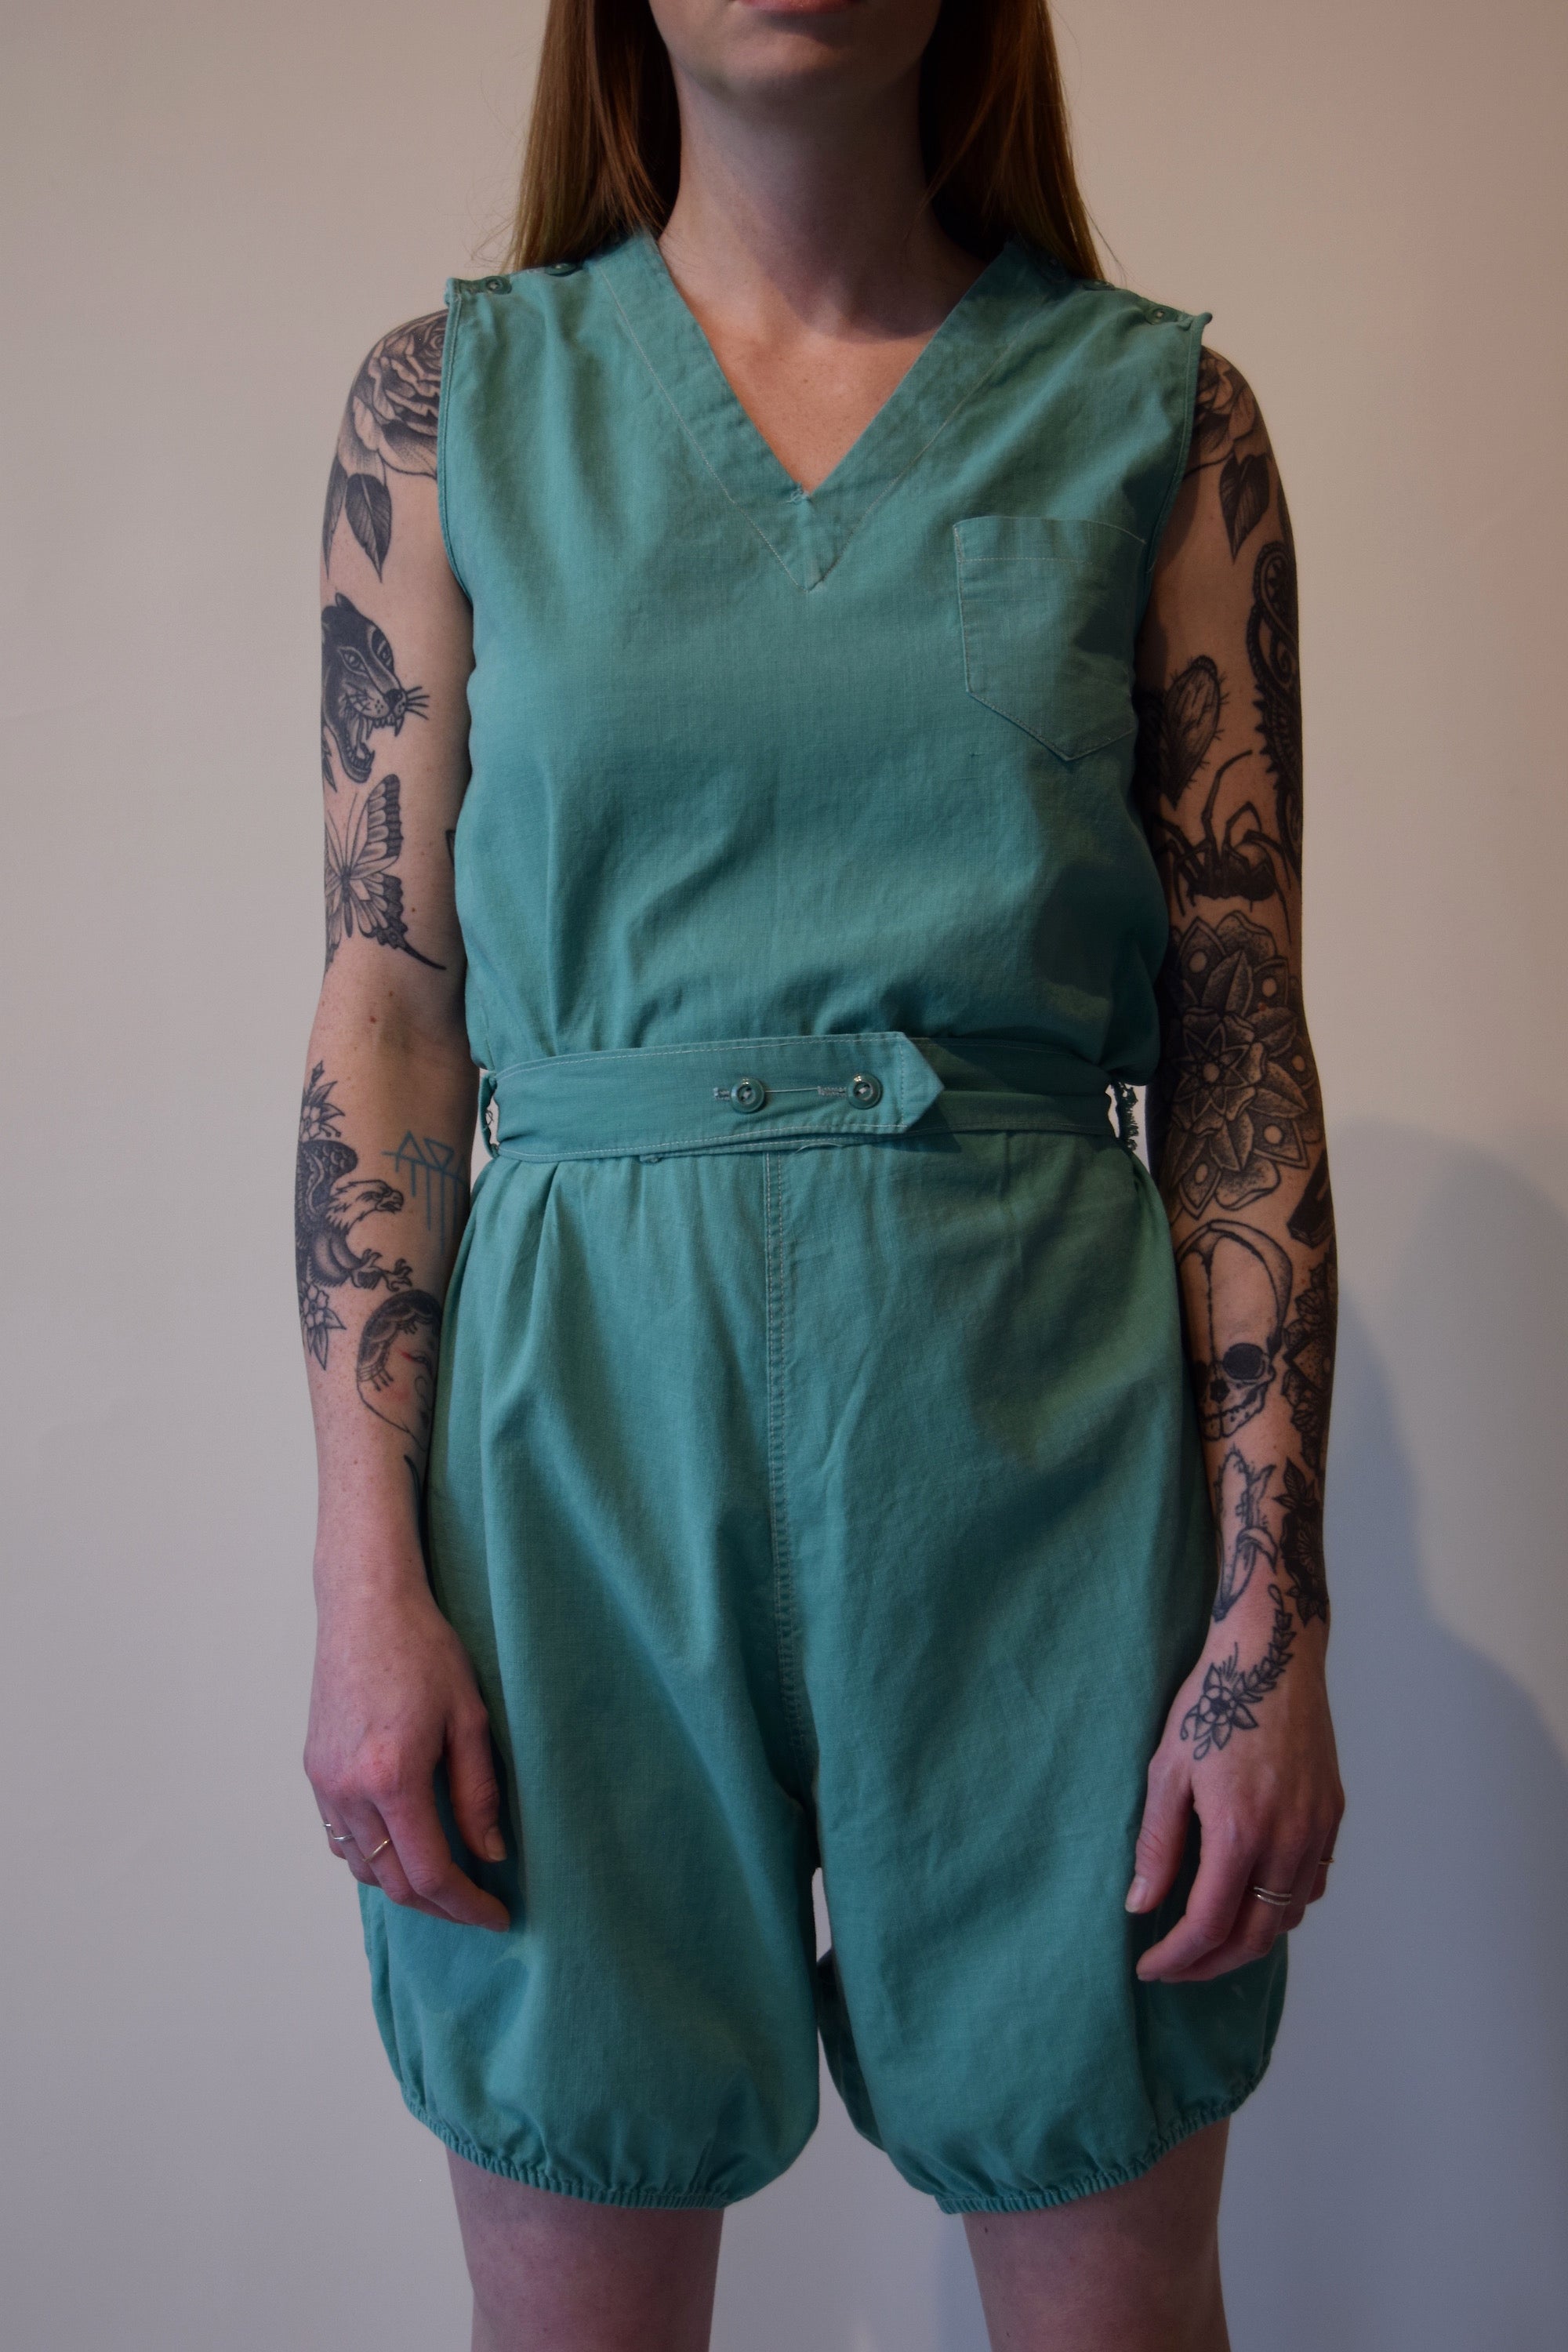 Vintage 1920's/1930's Seafoam Gym Outfit Romper with Embroidery